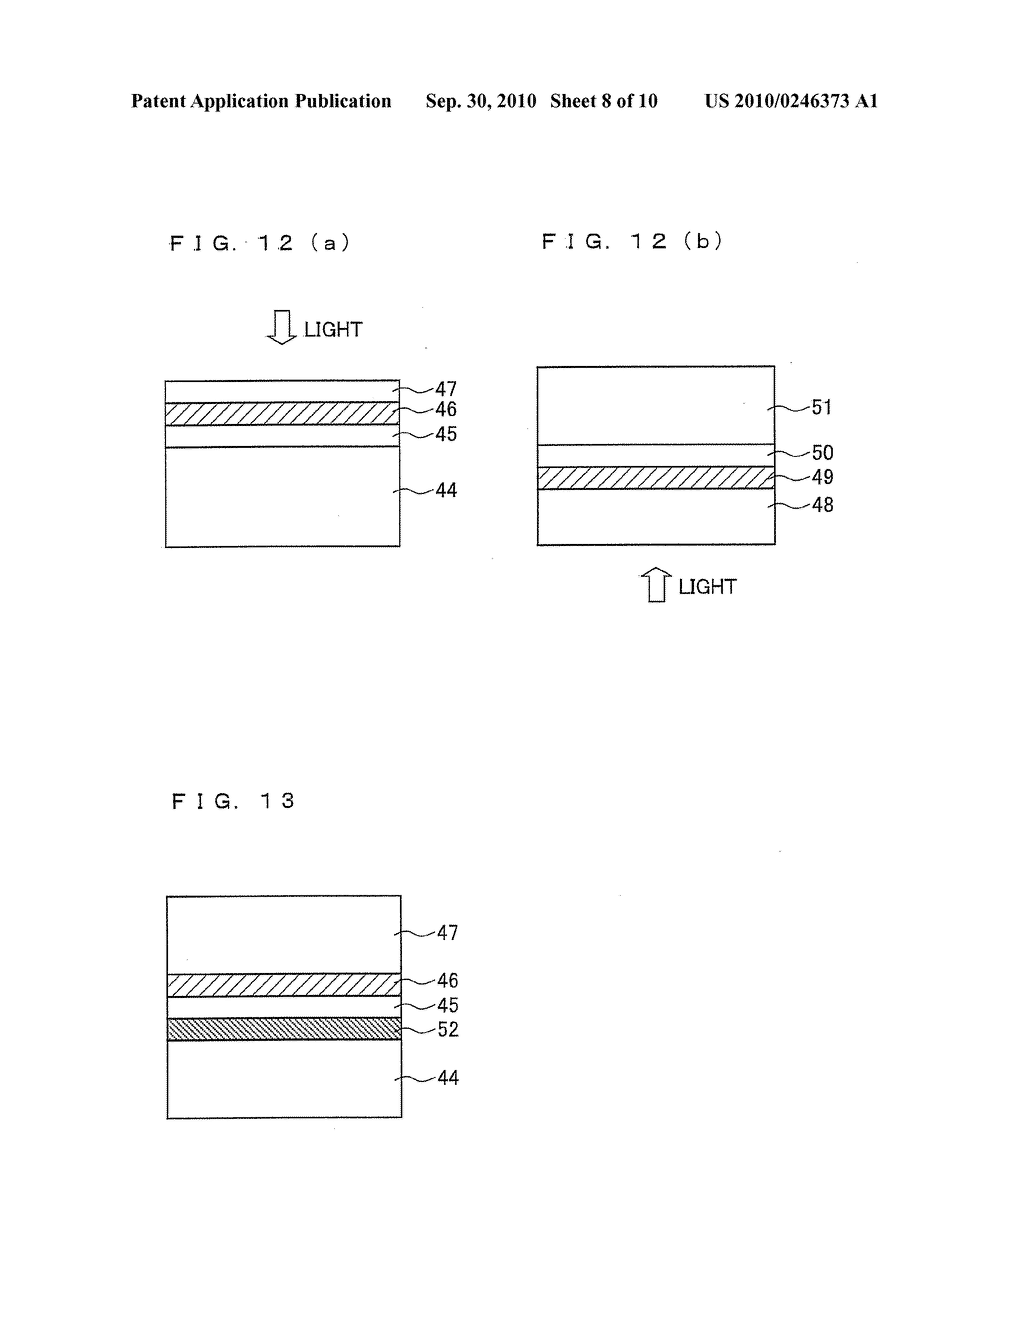 OPTICAL INFORMATION RECORDING MEDIUM, REPRODUCING DEVICE FOR OPTICAL INFORMATION RECORDING MEDIUM, CONTROL METHOD AND CONTROL PROGRAM FOR THE REPRODUCING DEVICE, AND MEDIUM WITH THE CONTROL PROGRAM RECORDED THEREIN - diagram, schematic, and image 09